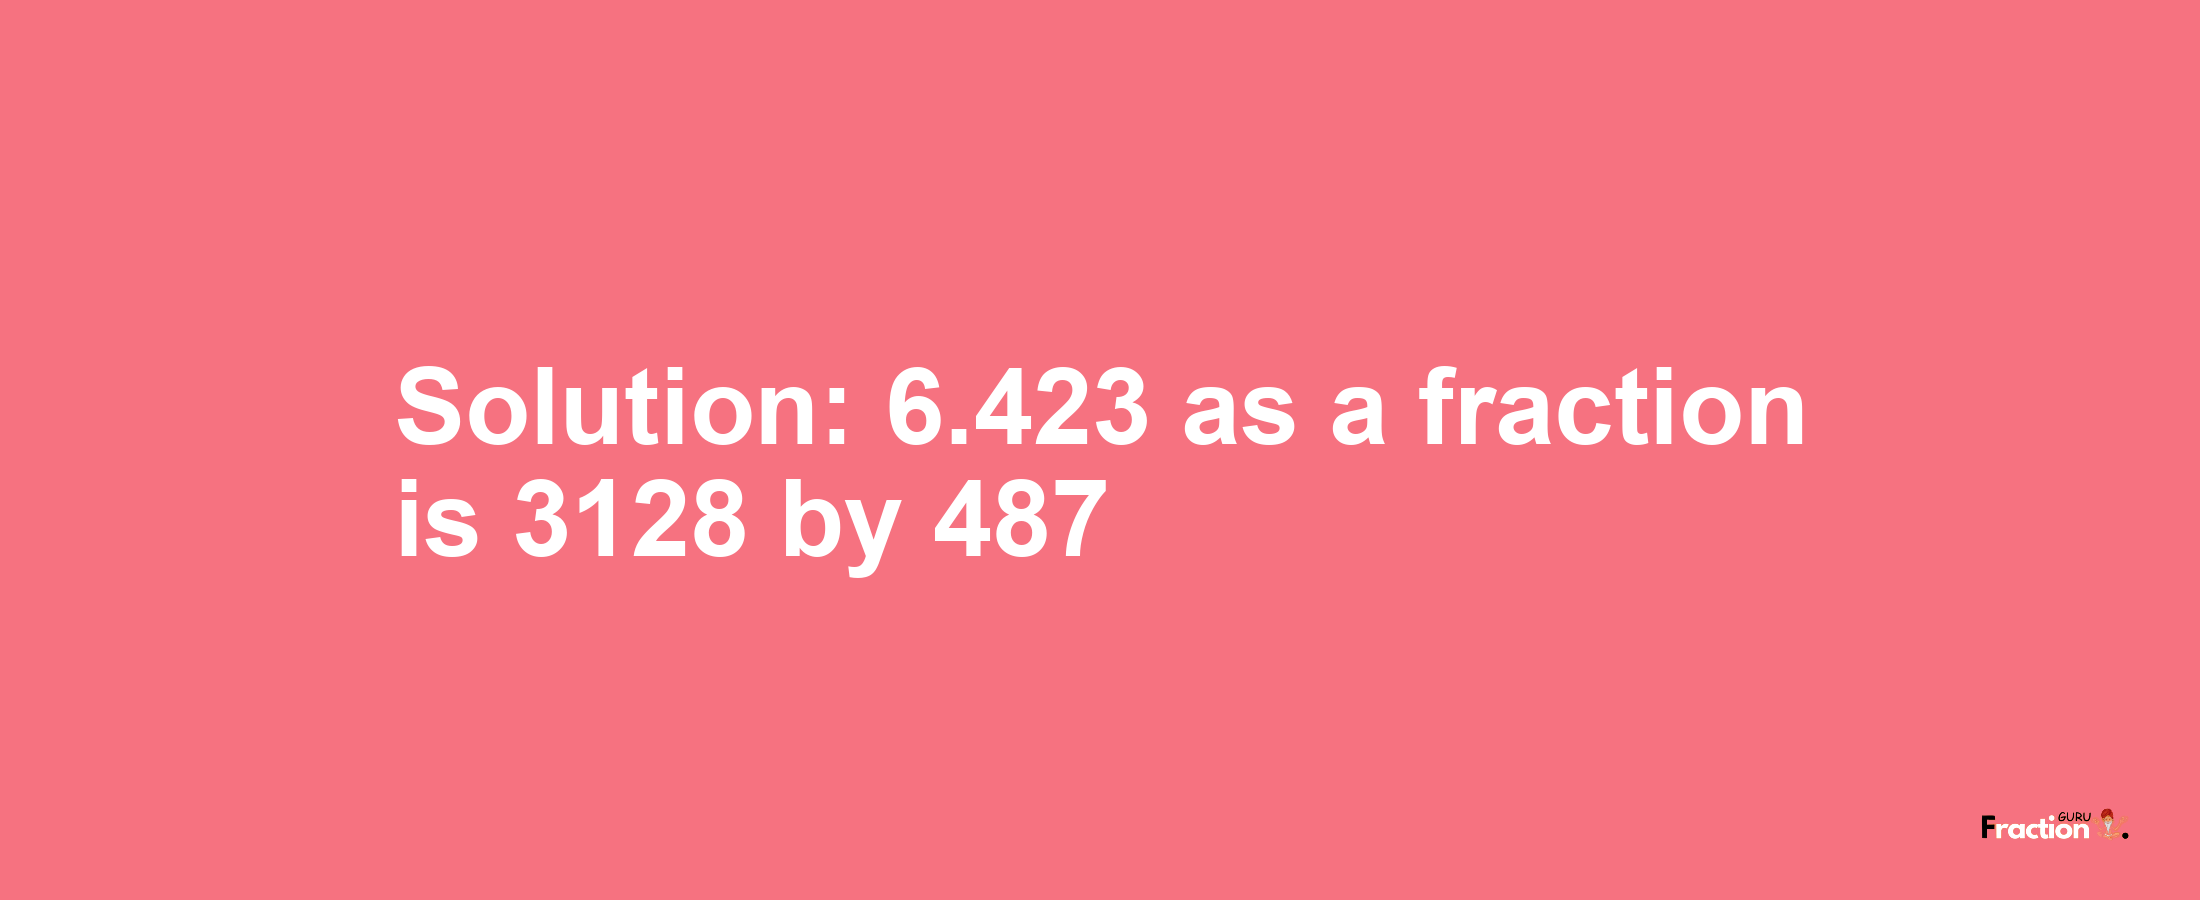 Solution:6.423 as a fraction is 3128/487